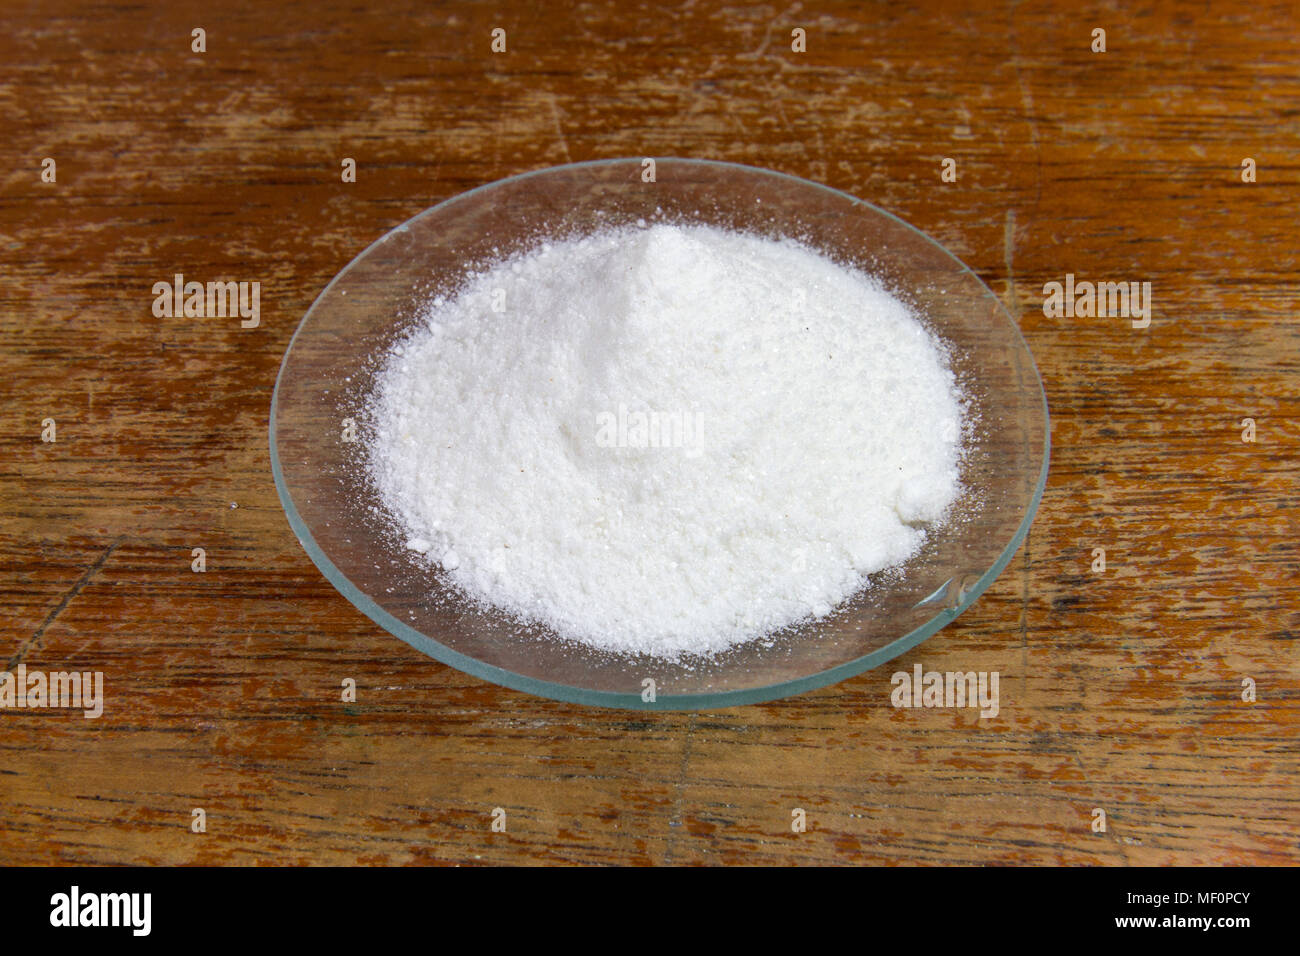 A watch glass of ascorbic acid (vitamin C) powder as used in a UK secondary/high school. Stock Photo